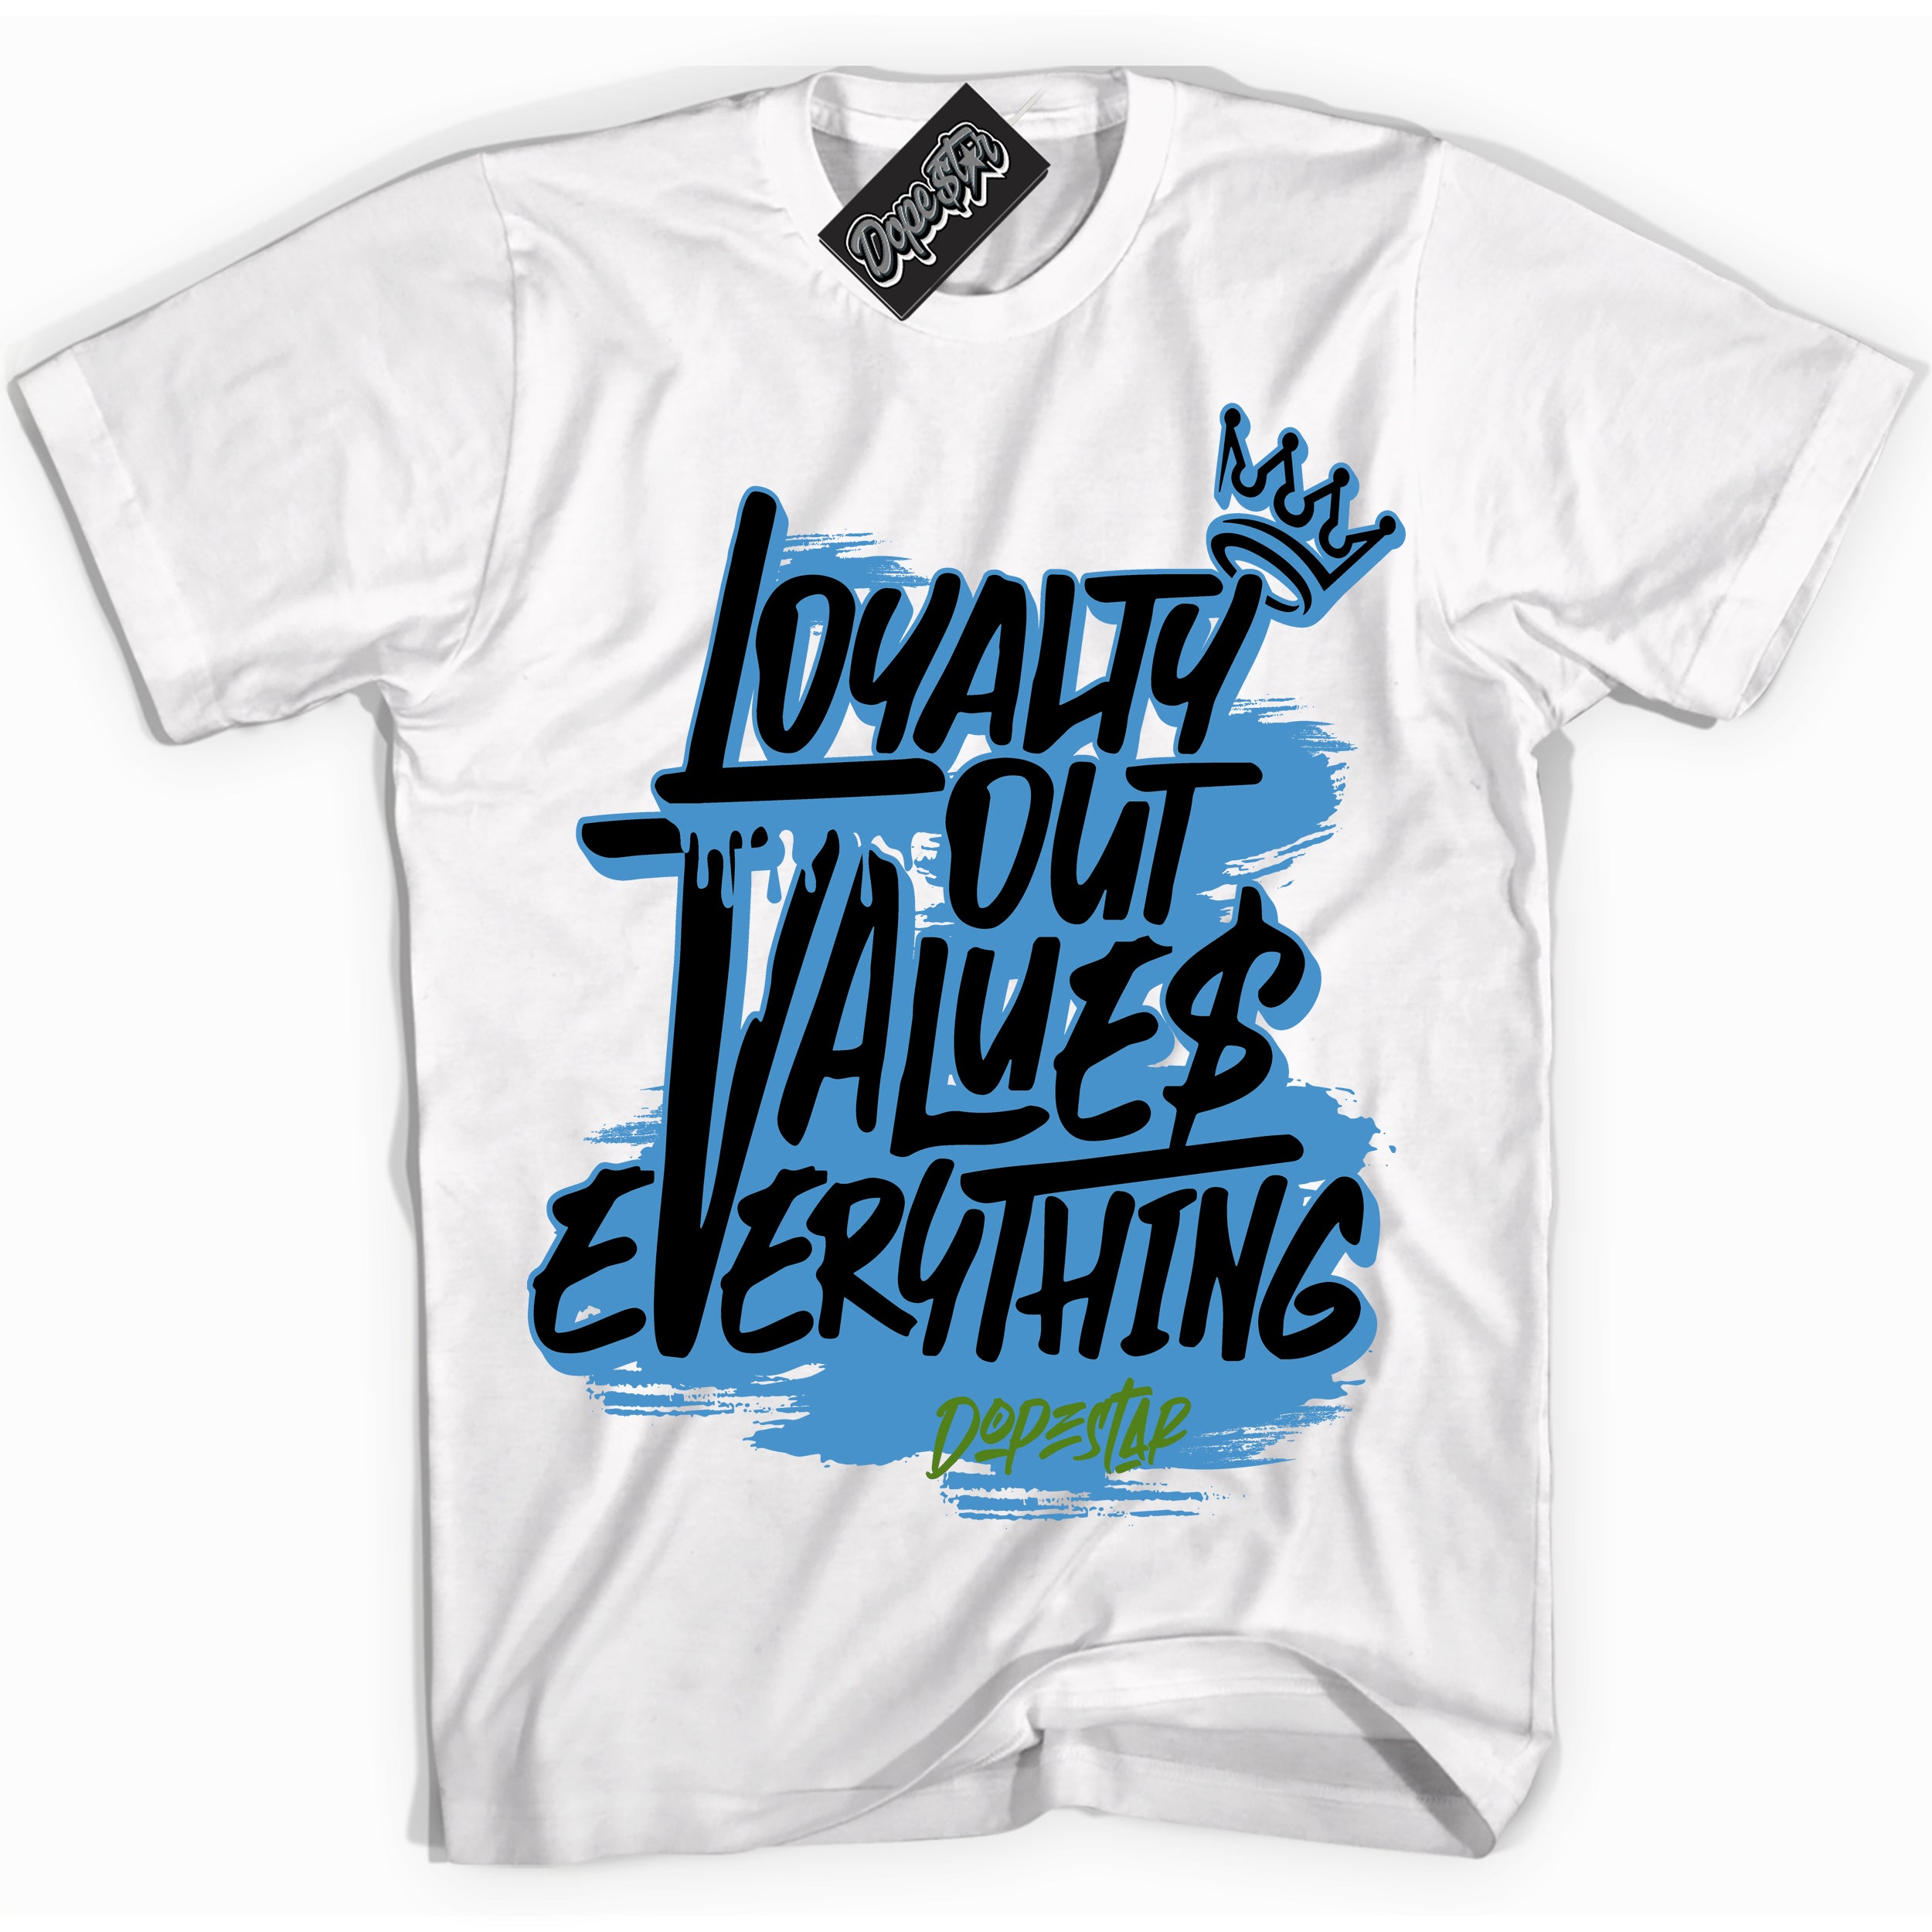 Cool White Shirt with “ Loyalty Out Values Everything” design that perfectly matches Black University Blue 13s Sneakers.